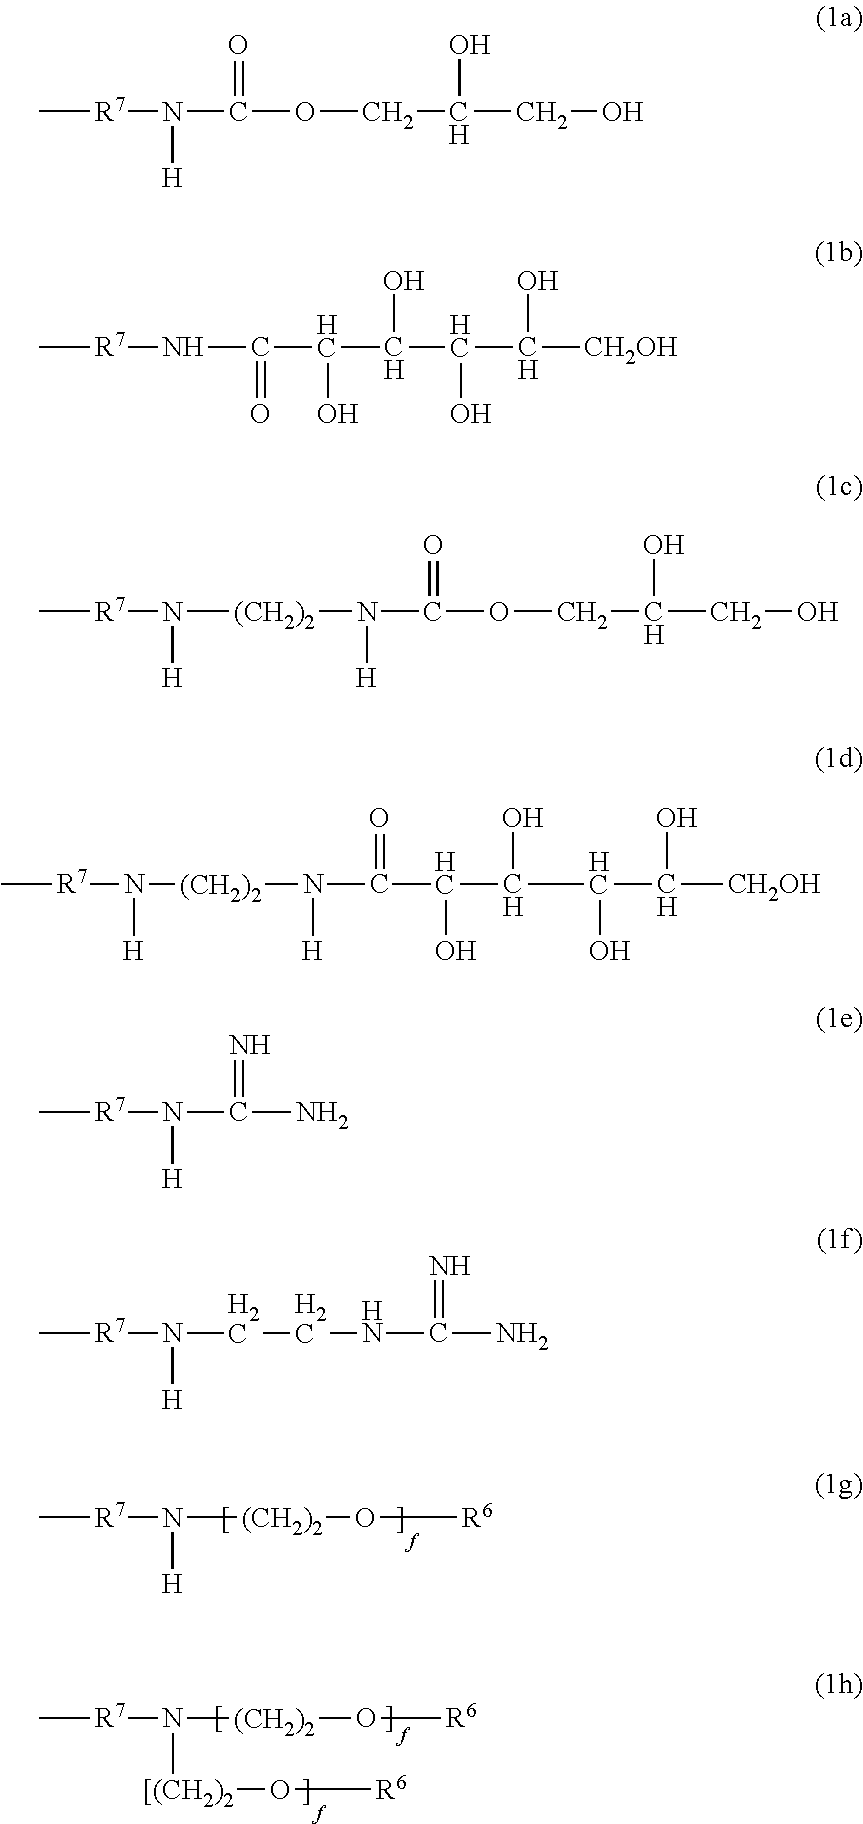 Polysiloxanes with nitrogen-containing groups